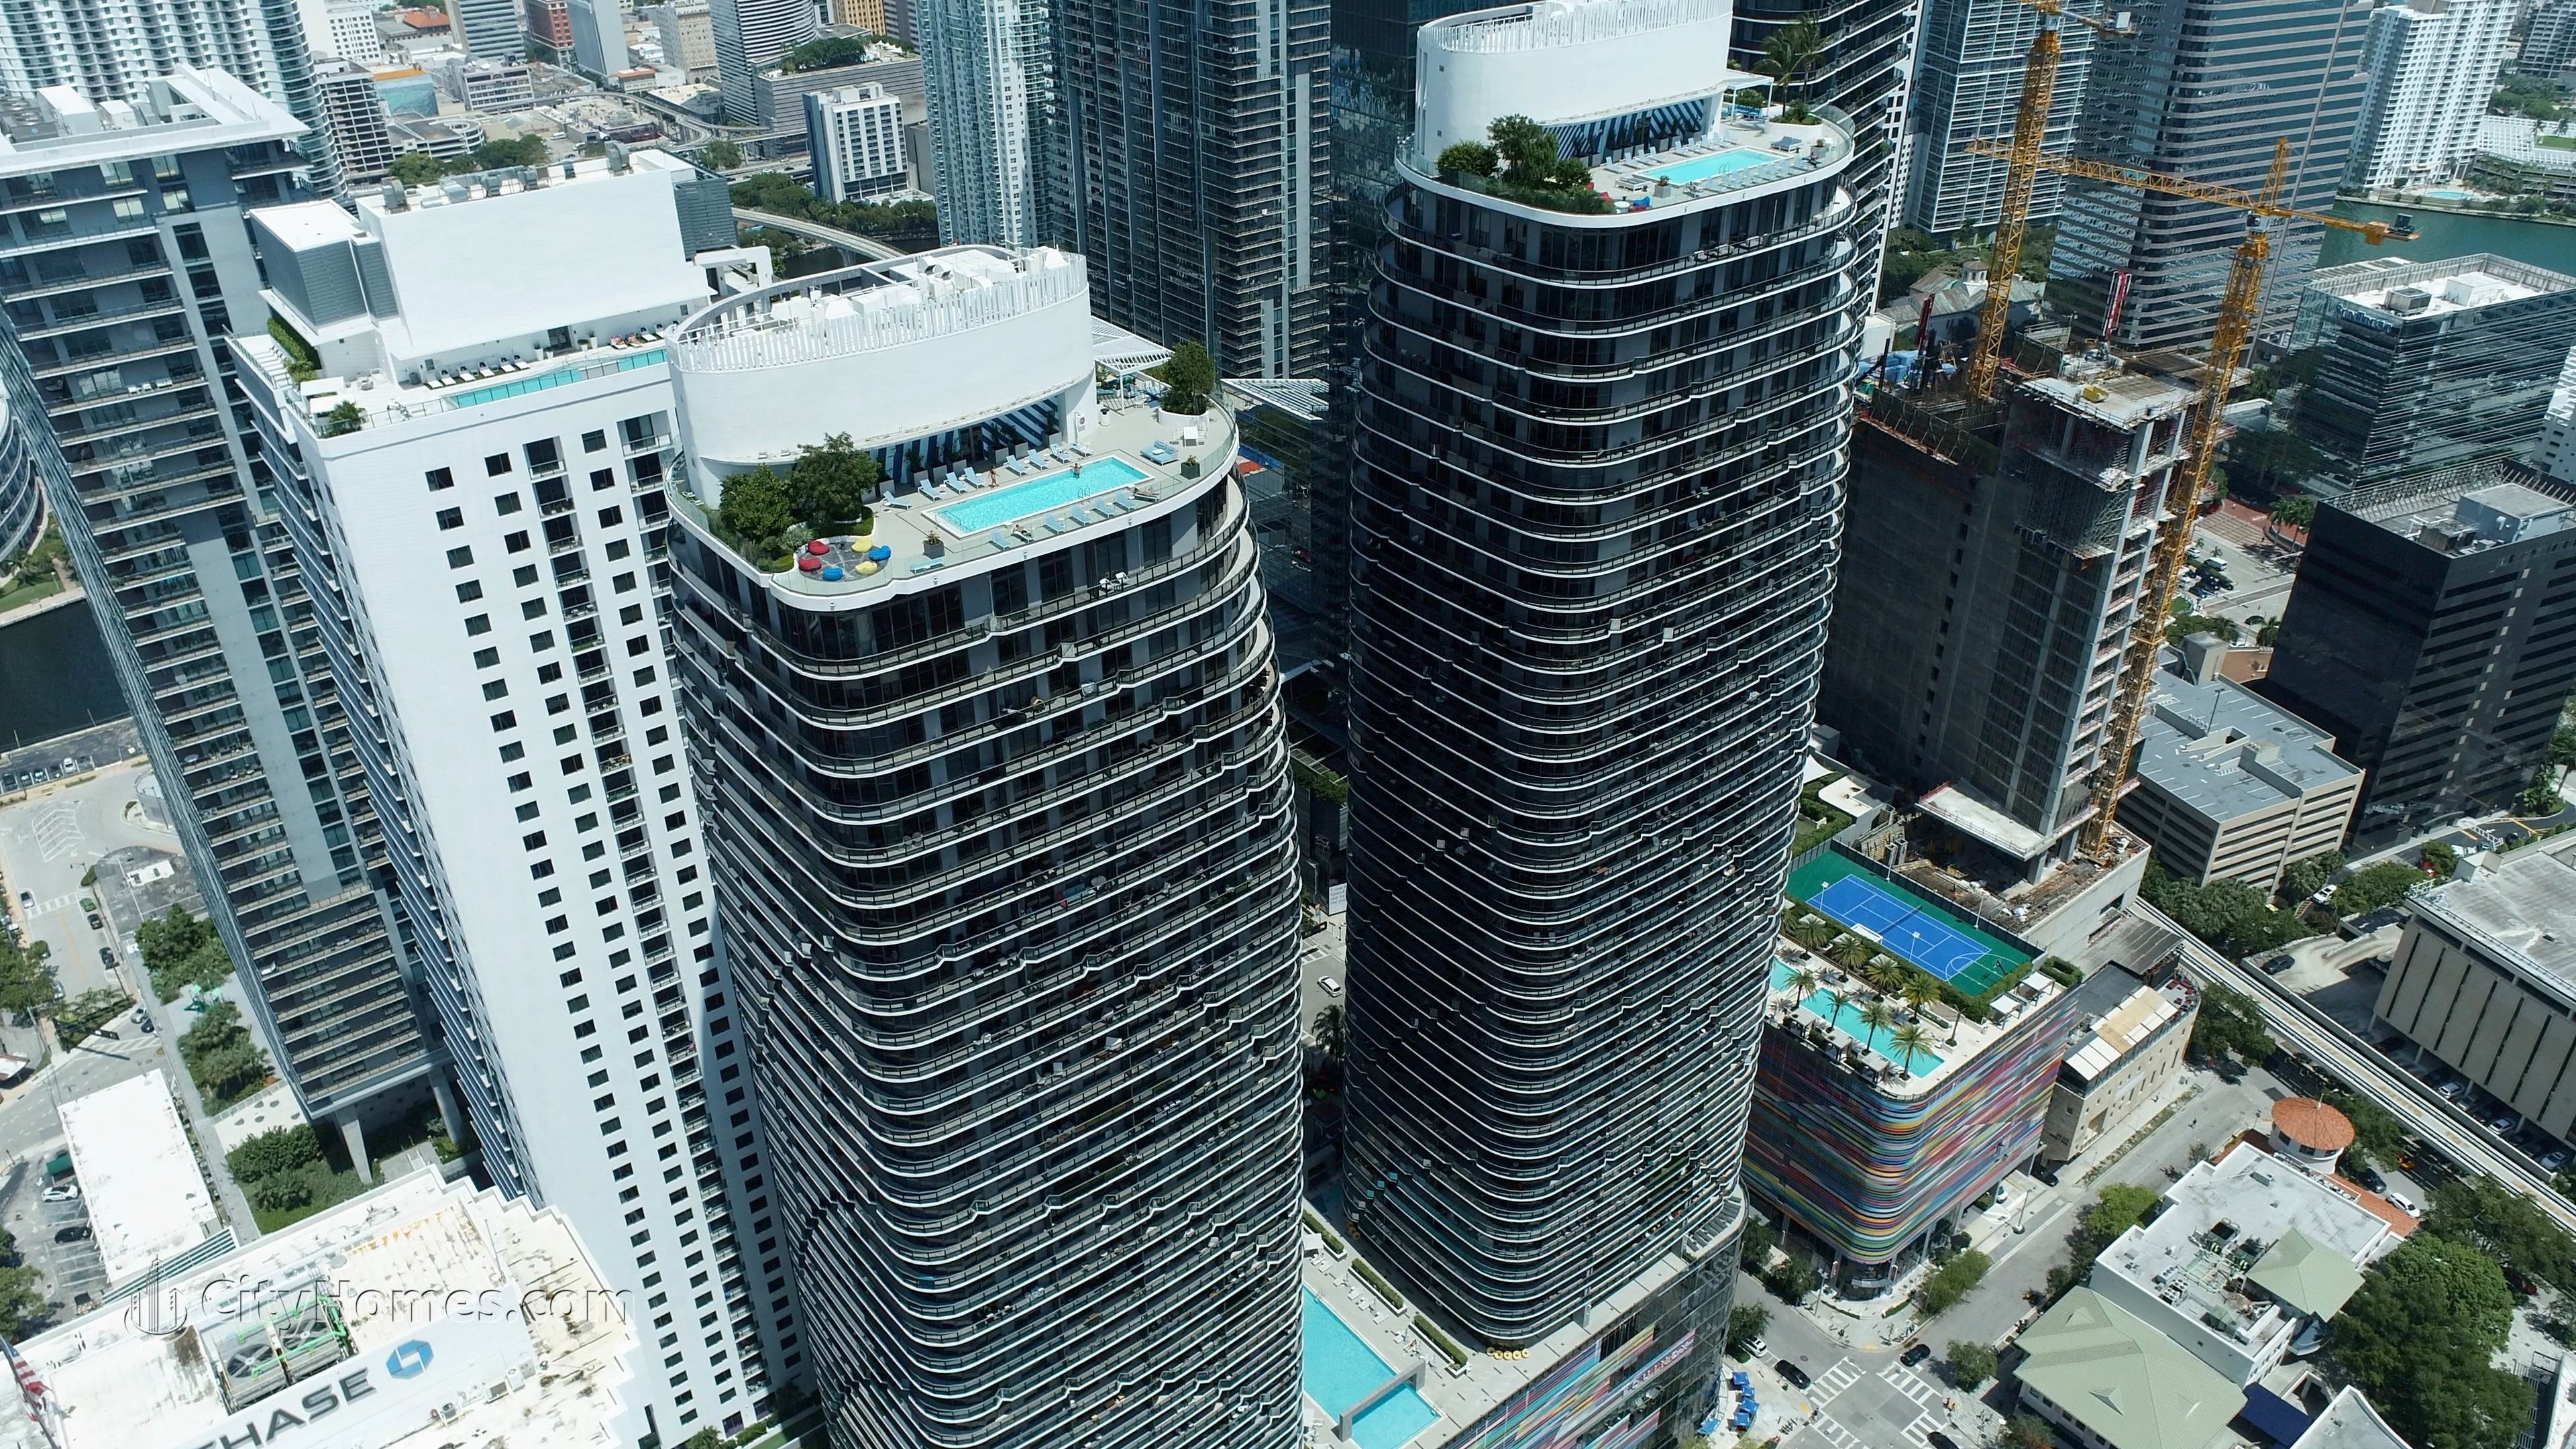 3. Brickell Heights - West Tower building at 55 SW 9th Street, Brickell, Miami, FL 33130